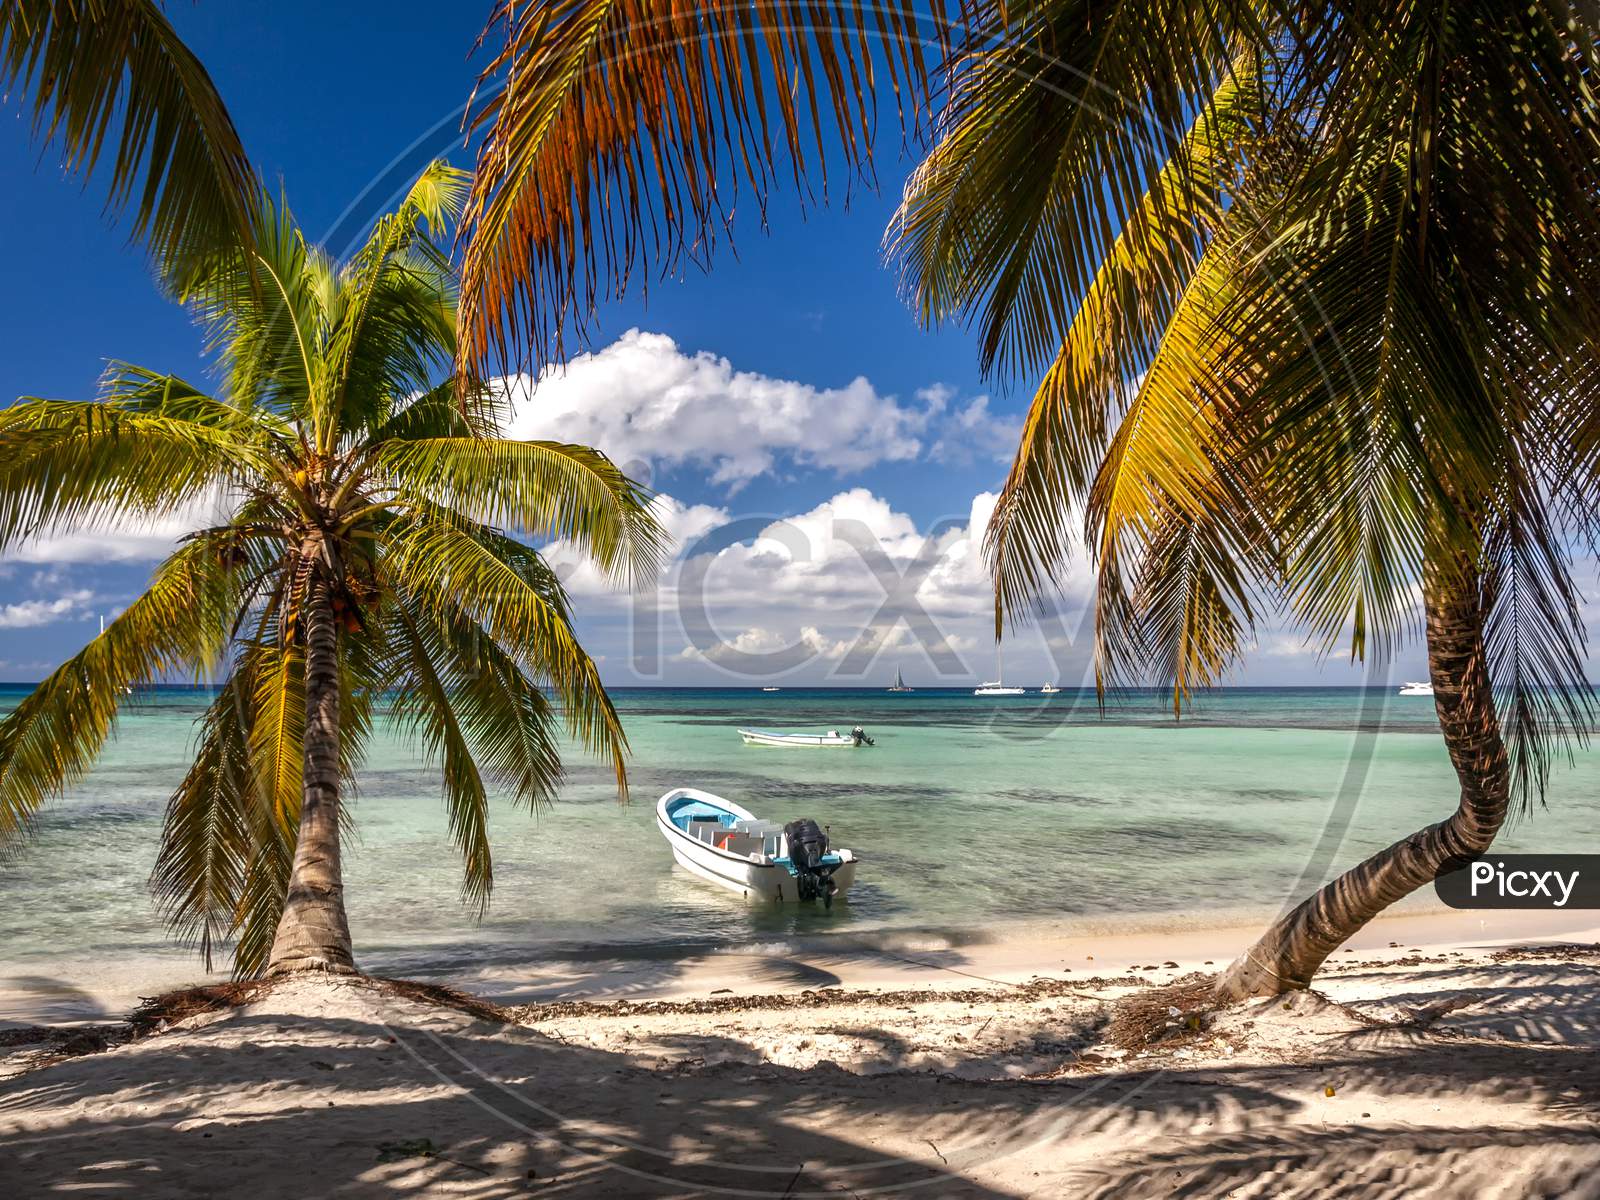 A relaxing shot of a boats tied up on a Caribbean beach by the shade of palm trees.